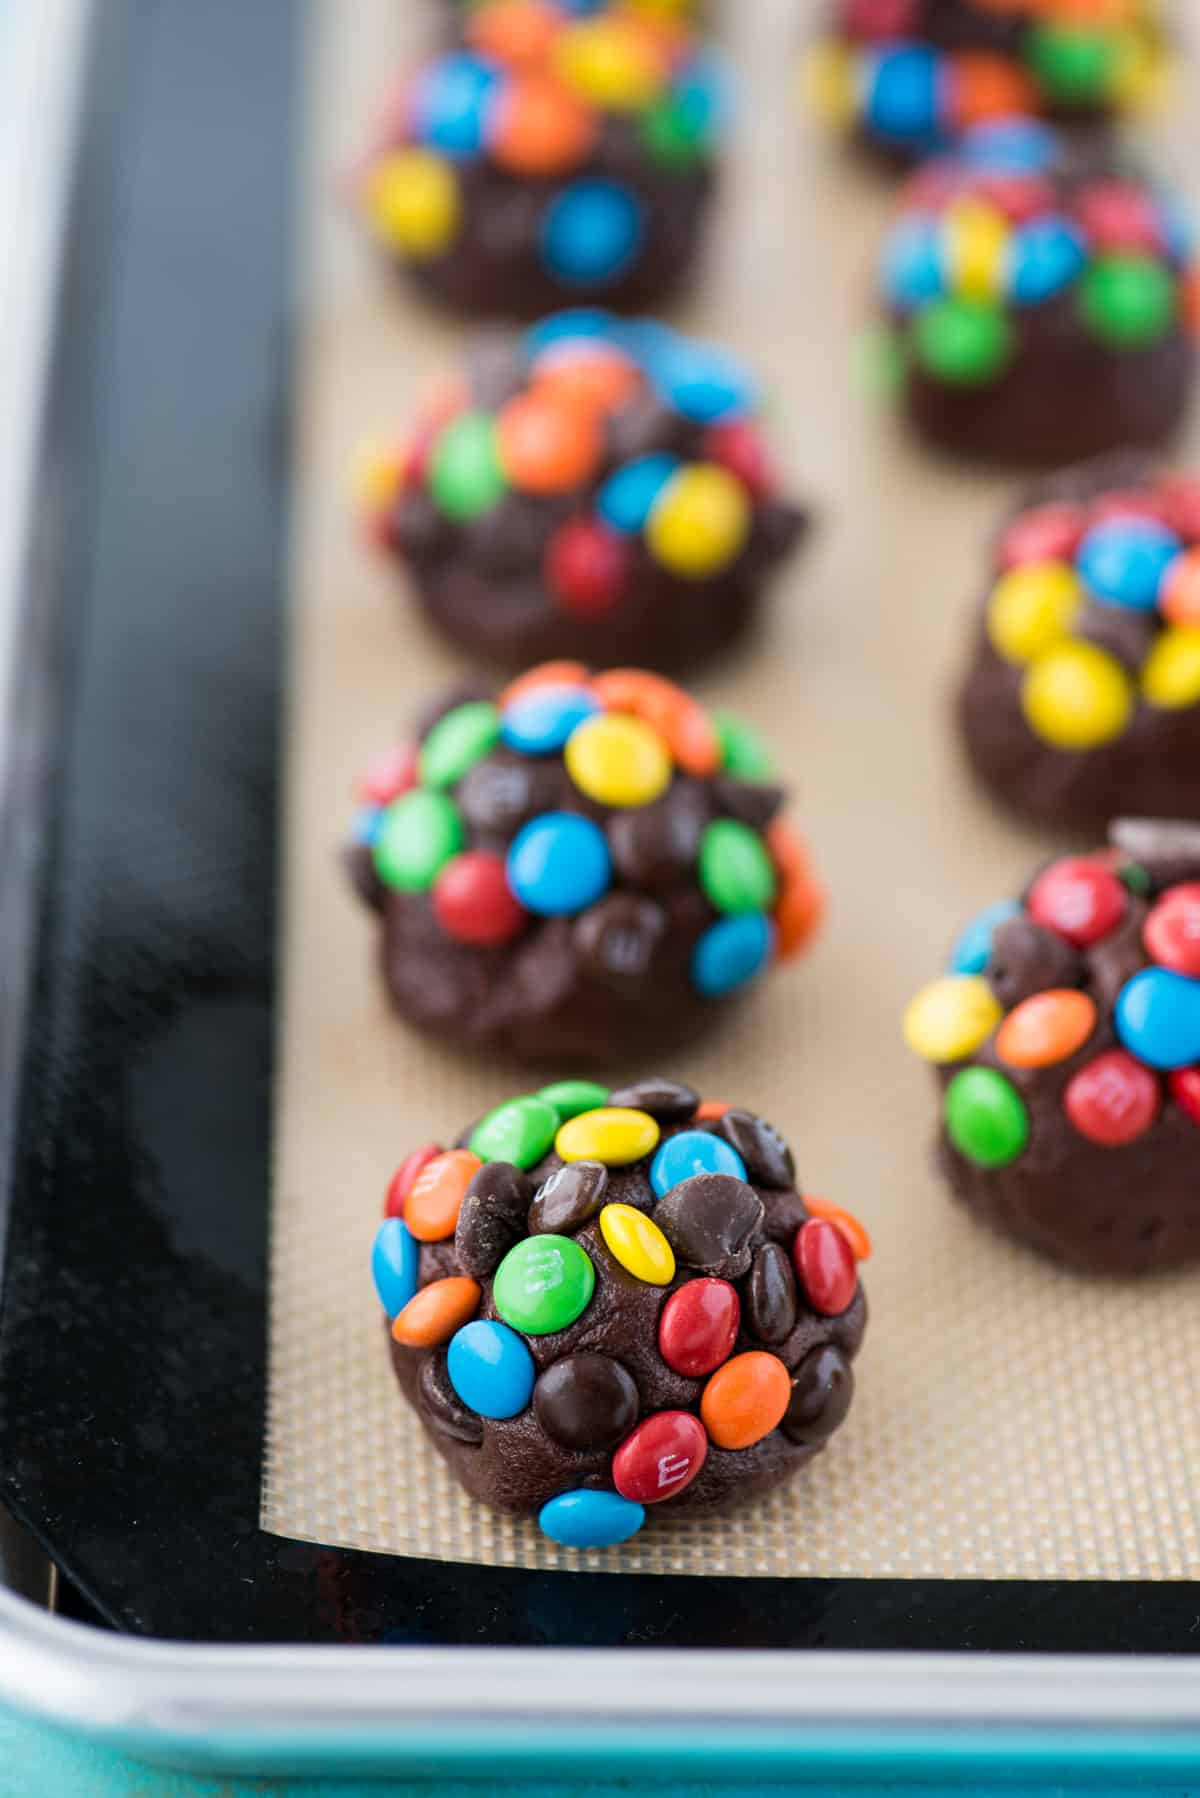 double chocolate chip cookie dough balls with m&ms and chocolate chips on silicone baking mat